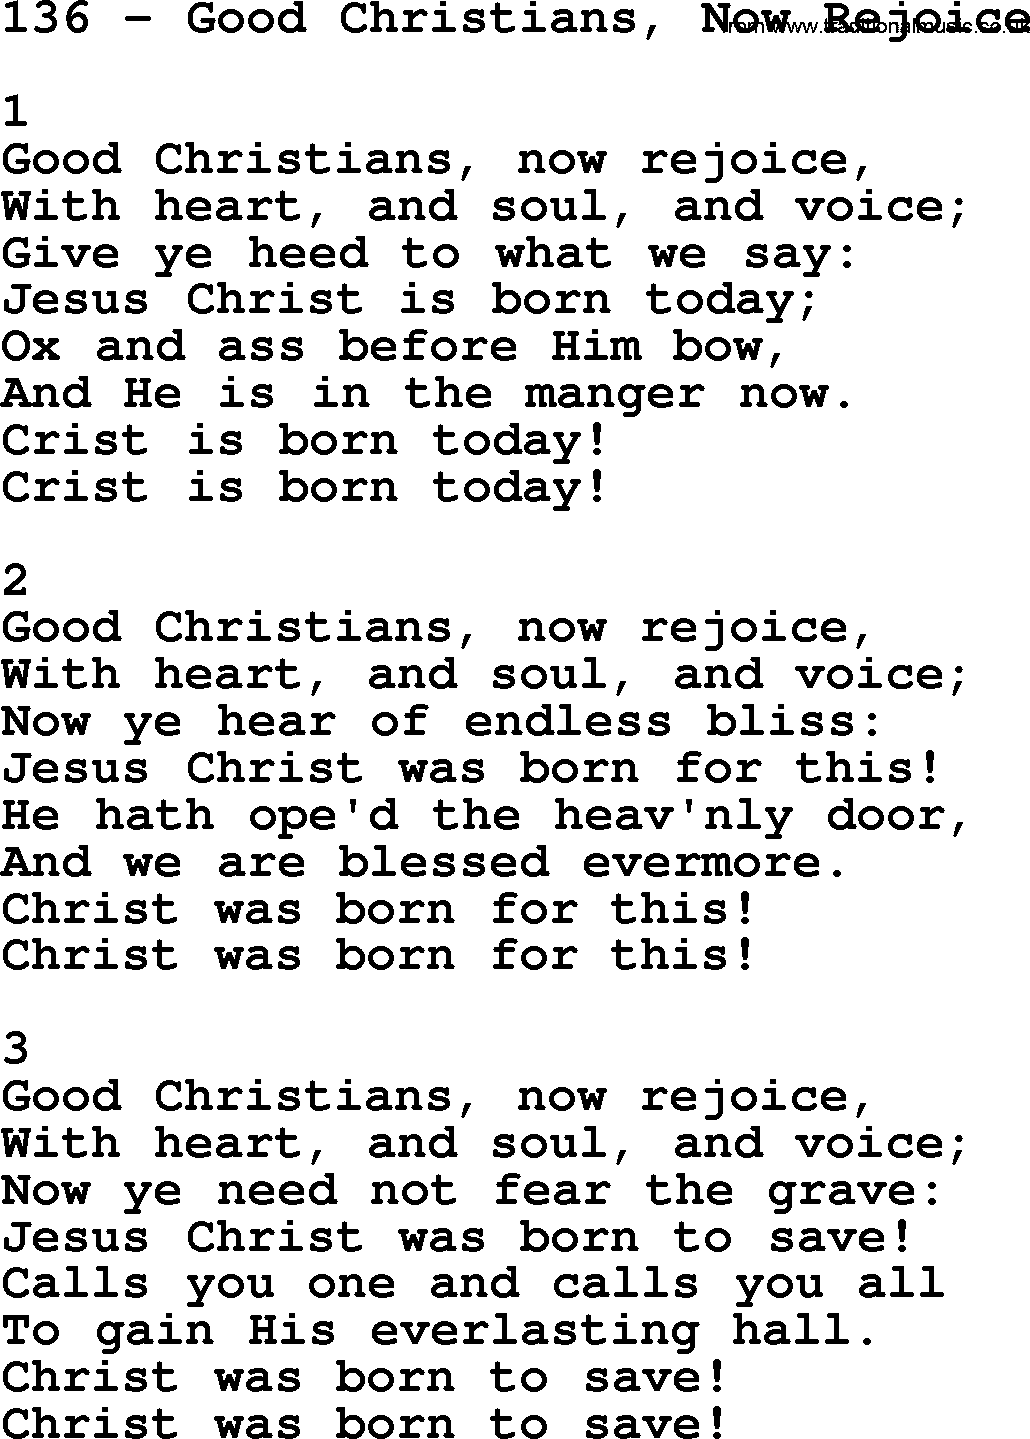 Complete Adventis Hymnal, title: 136-Good Christians, Now Rejoice, with lyrics, midi, mp3, powerpoints(PPT) and PDF,